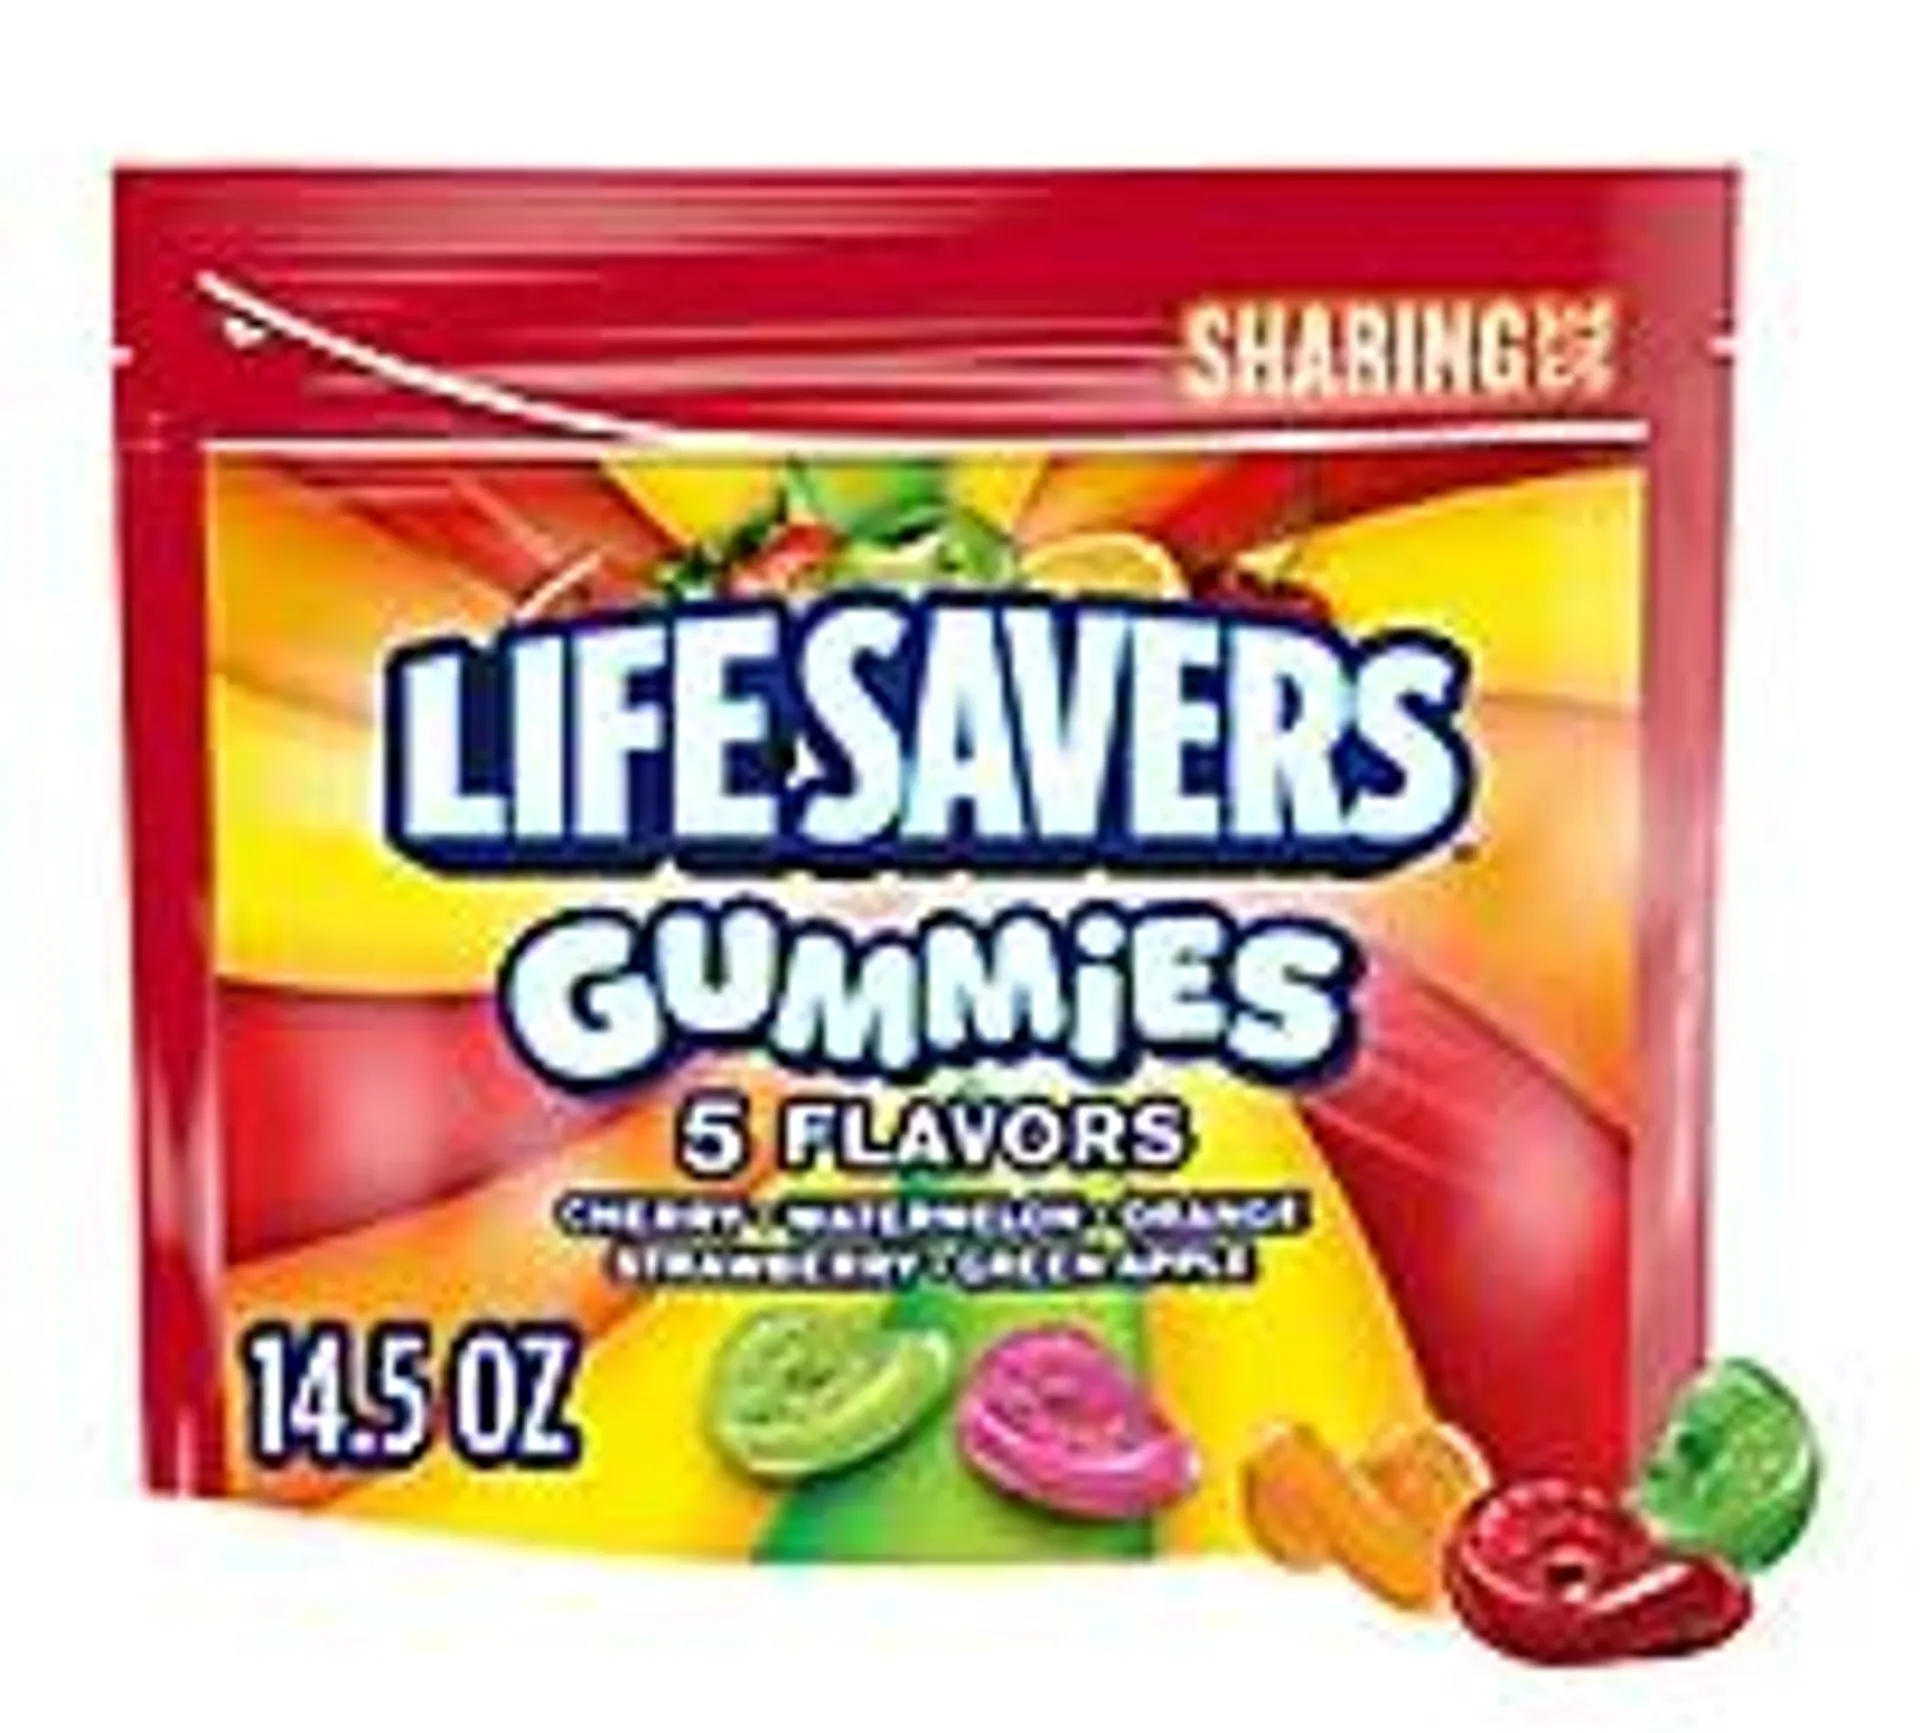 Life Savers Gummy Candy 5 Flavors Sharing Size Bag - 14.5 Oz